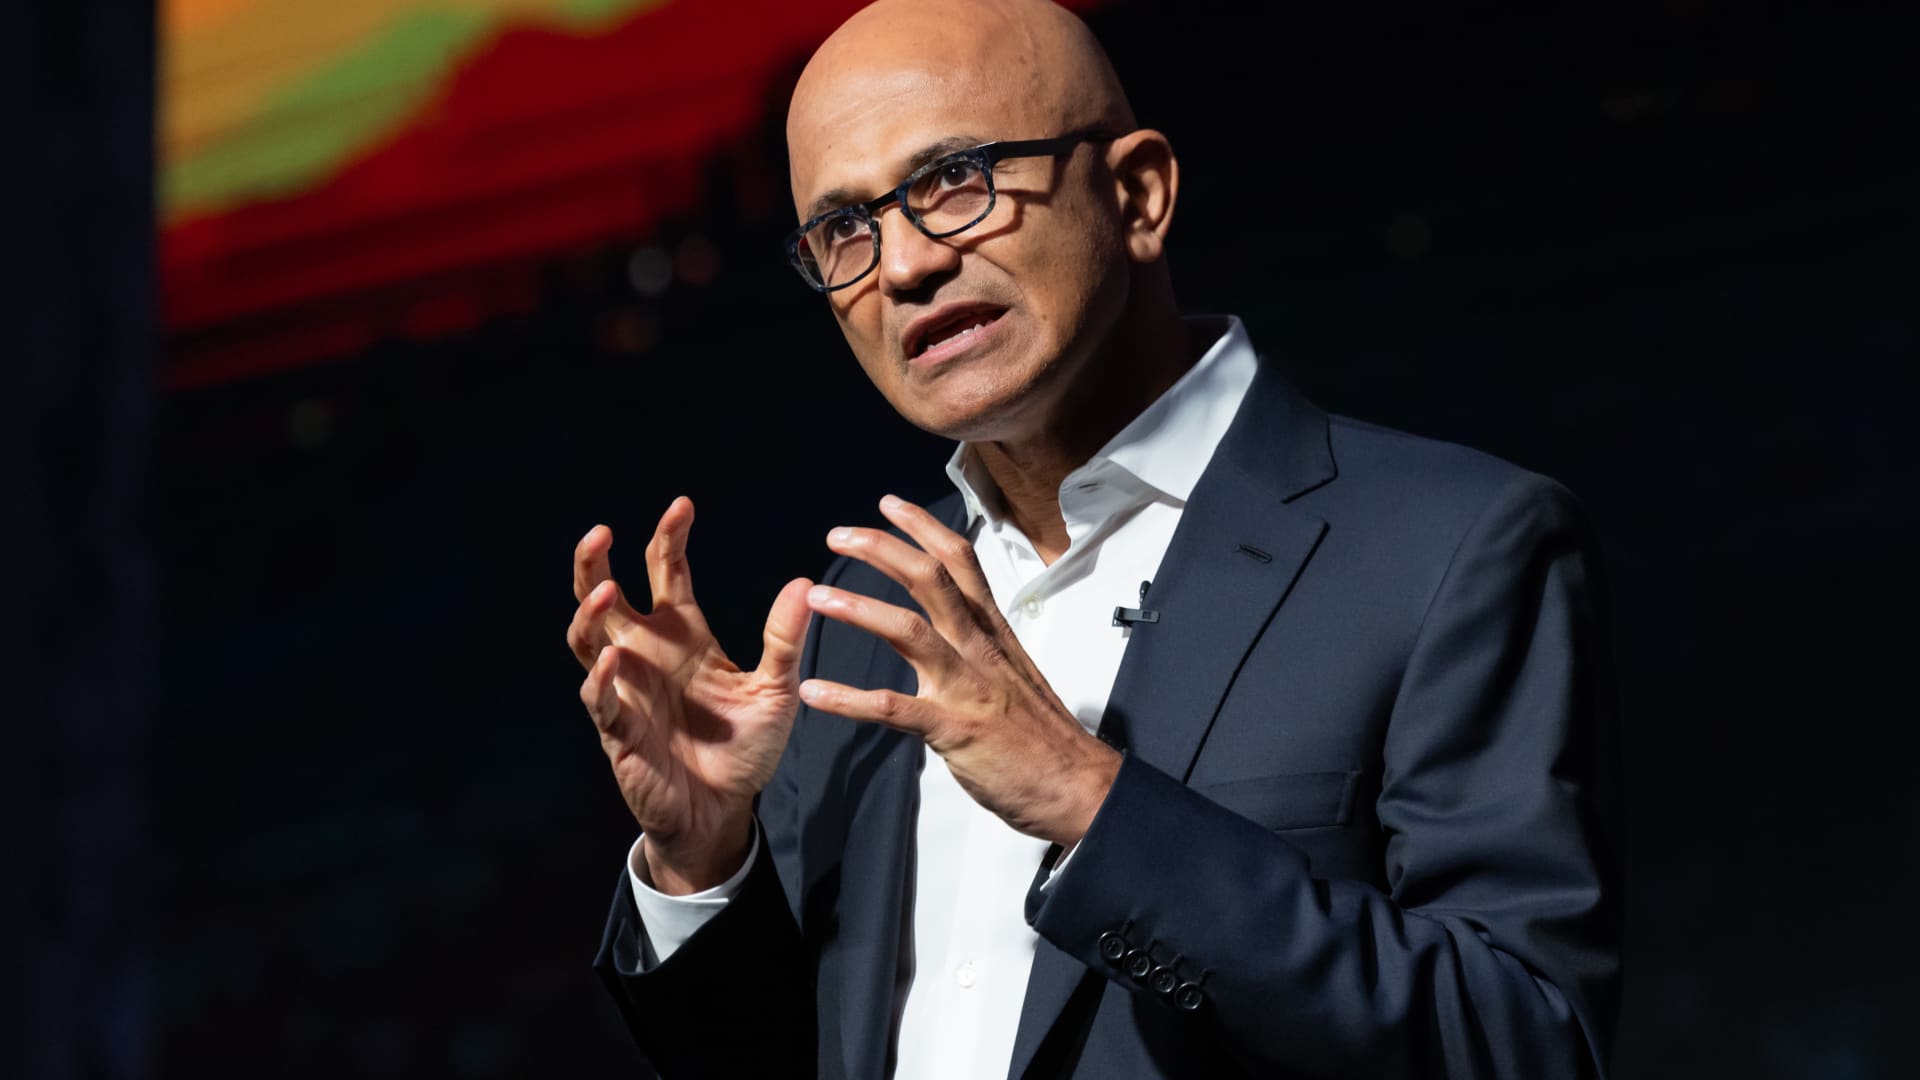 Microsoft shares dip after quarterly revenue guidance misses expectations